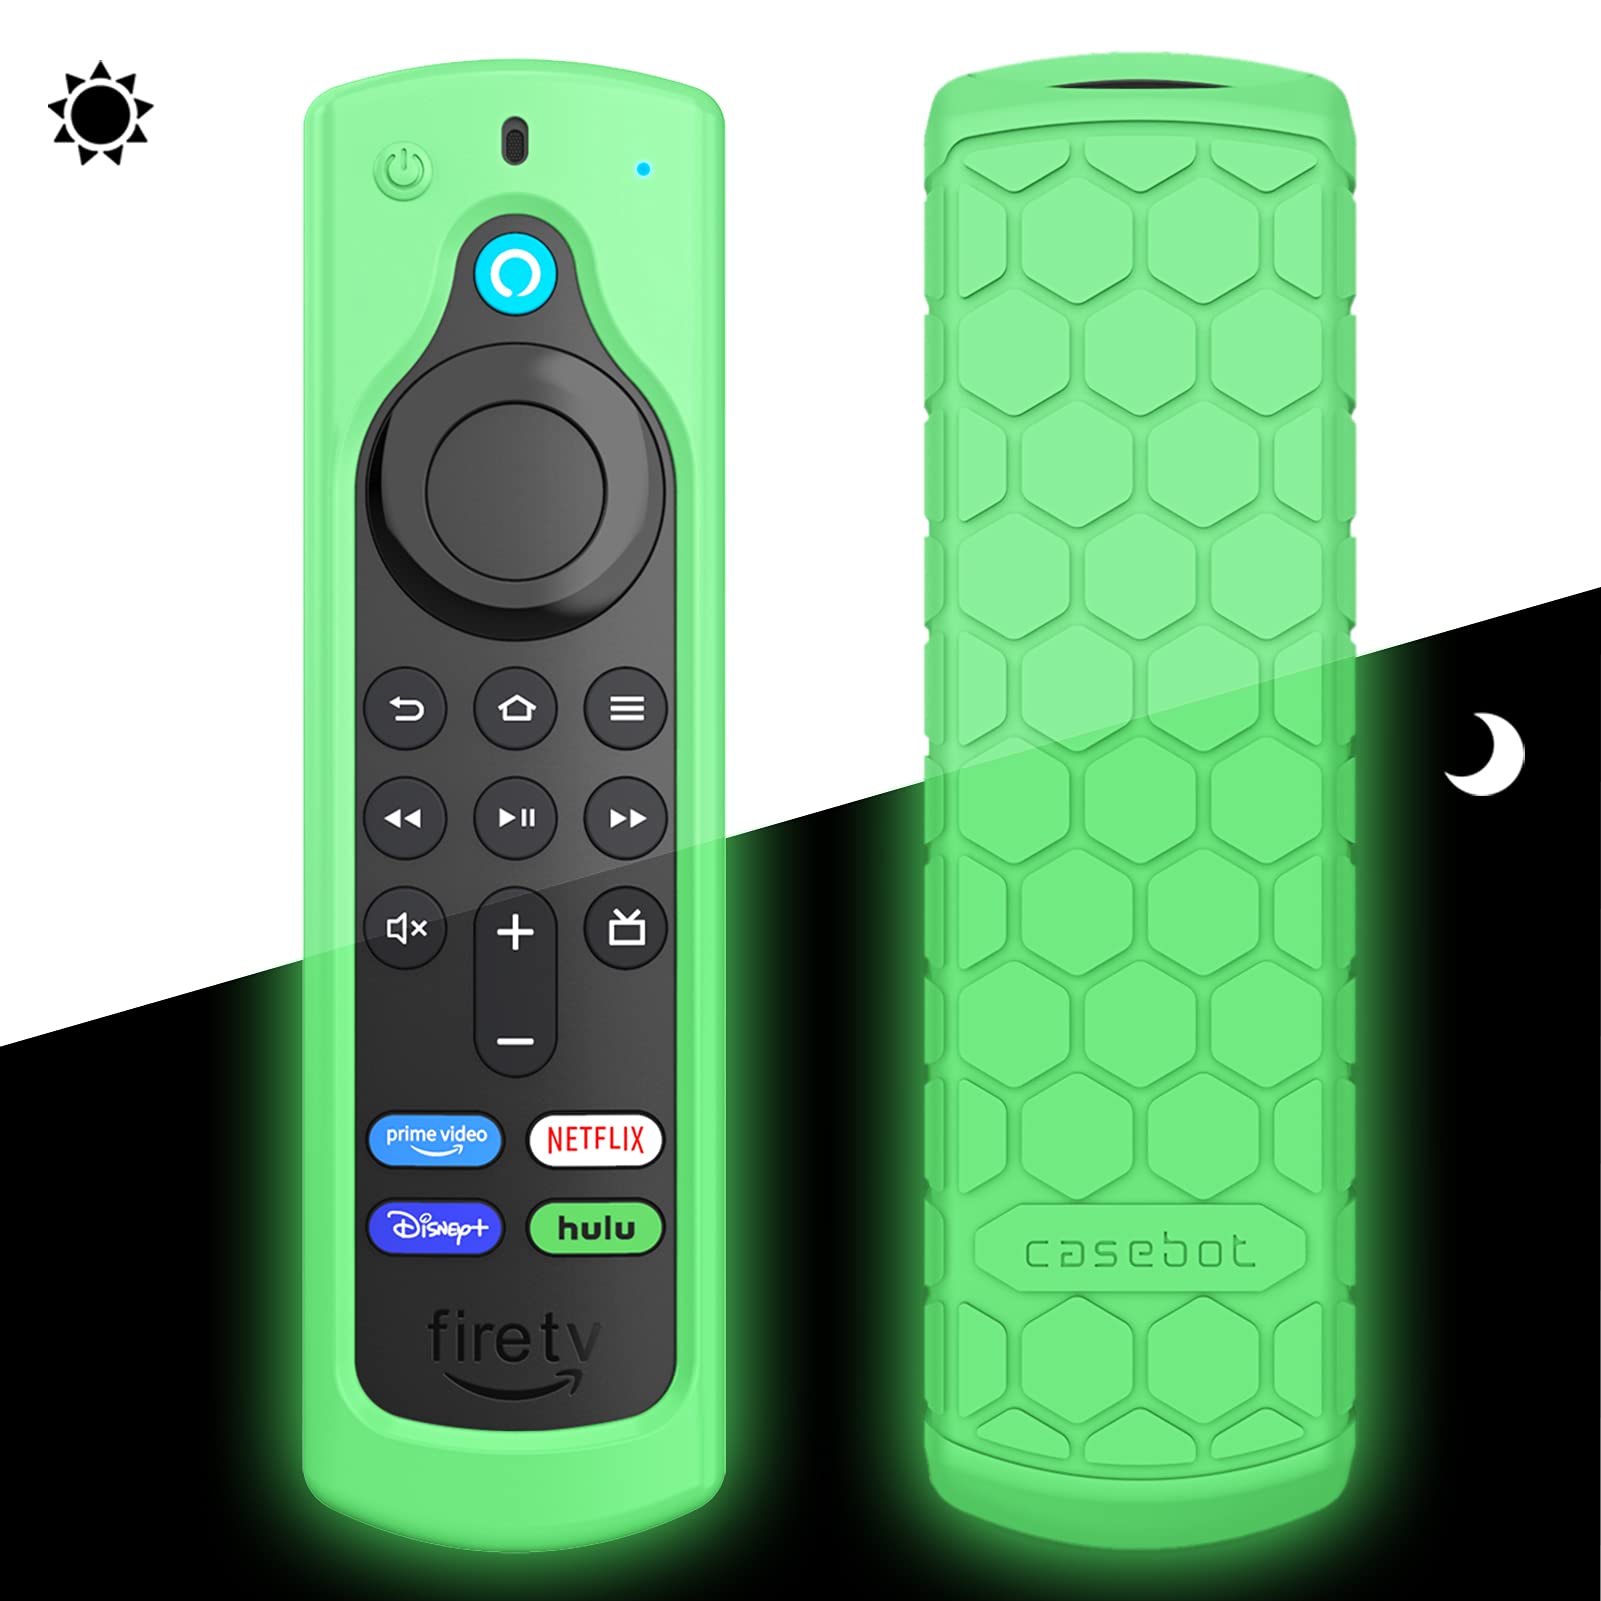 Book Cover CaseBot Remote Case for Fire TV Stick 4K Max/Fire TV Stick (2nd and Later) / Fire TV Stick Lite/Fire TV Cube - Anti-Slip Silicone Cover for Alexa Voice Remote (2nd Gen and 3rd Gen), Green-Glow Green Glow in the Dark